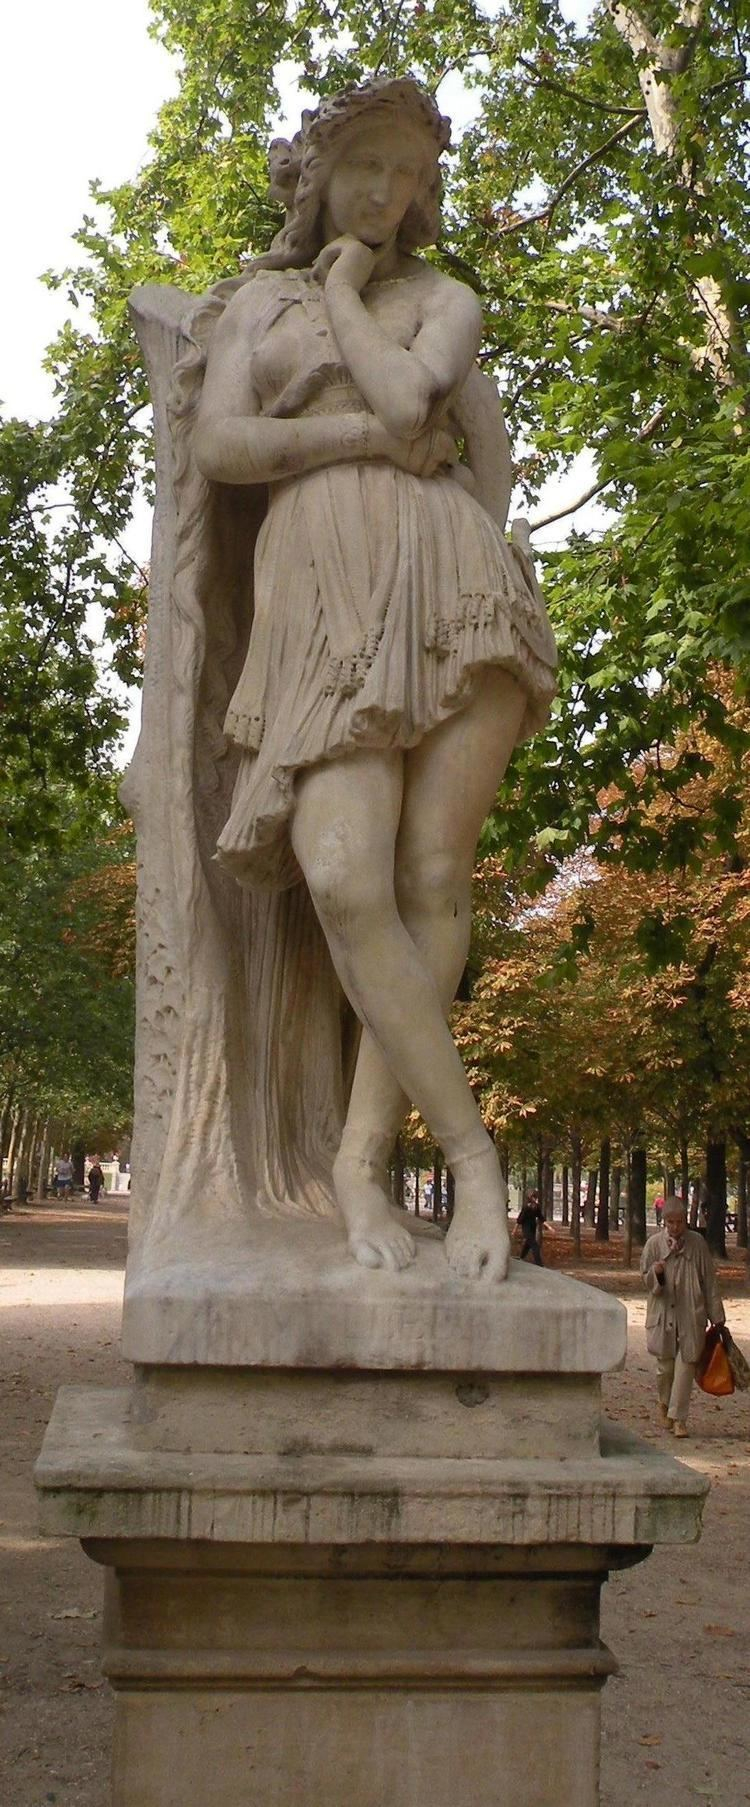 This sculpture is located in the Jardin du Luxembourg - Photo: waymarking.com